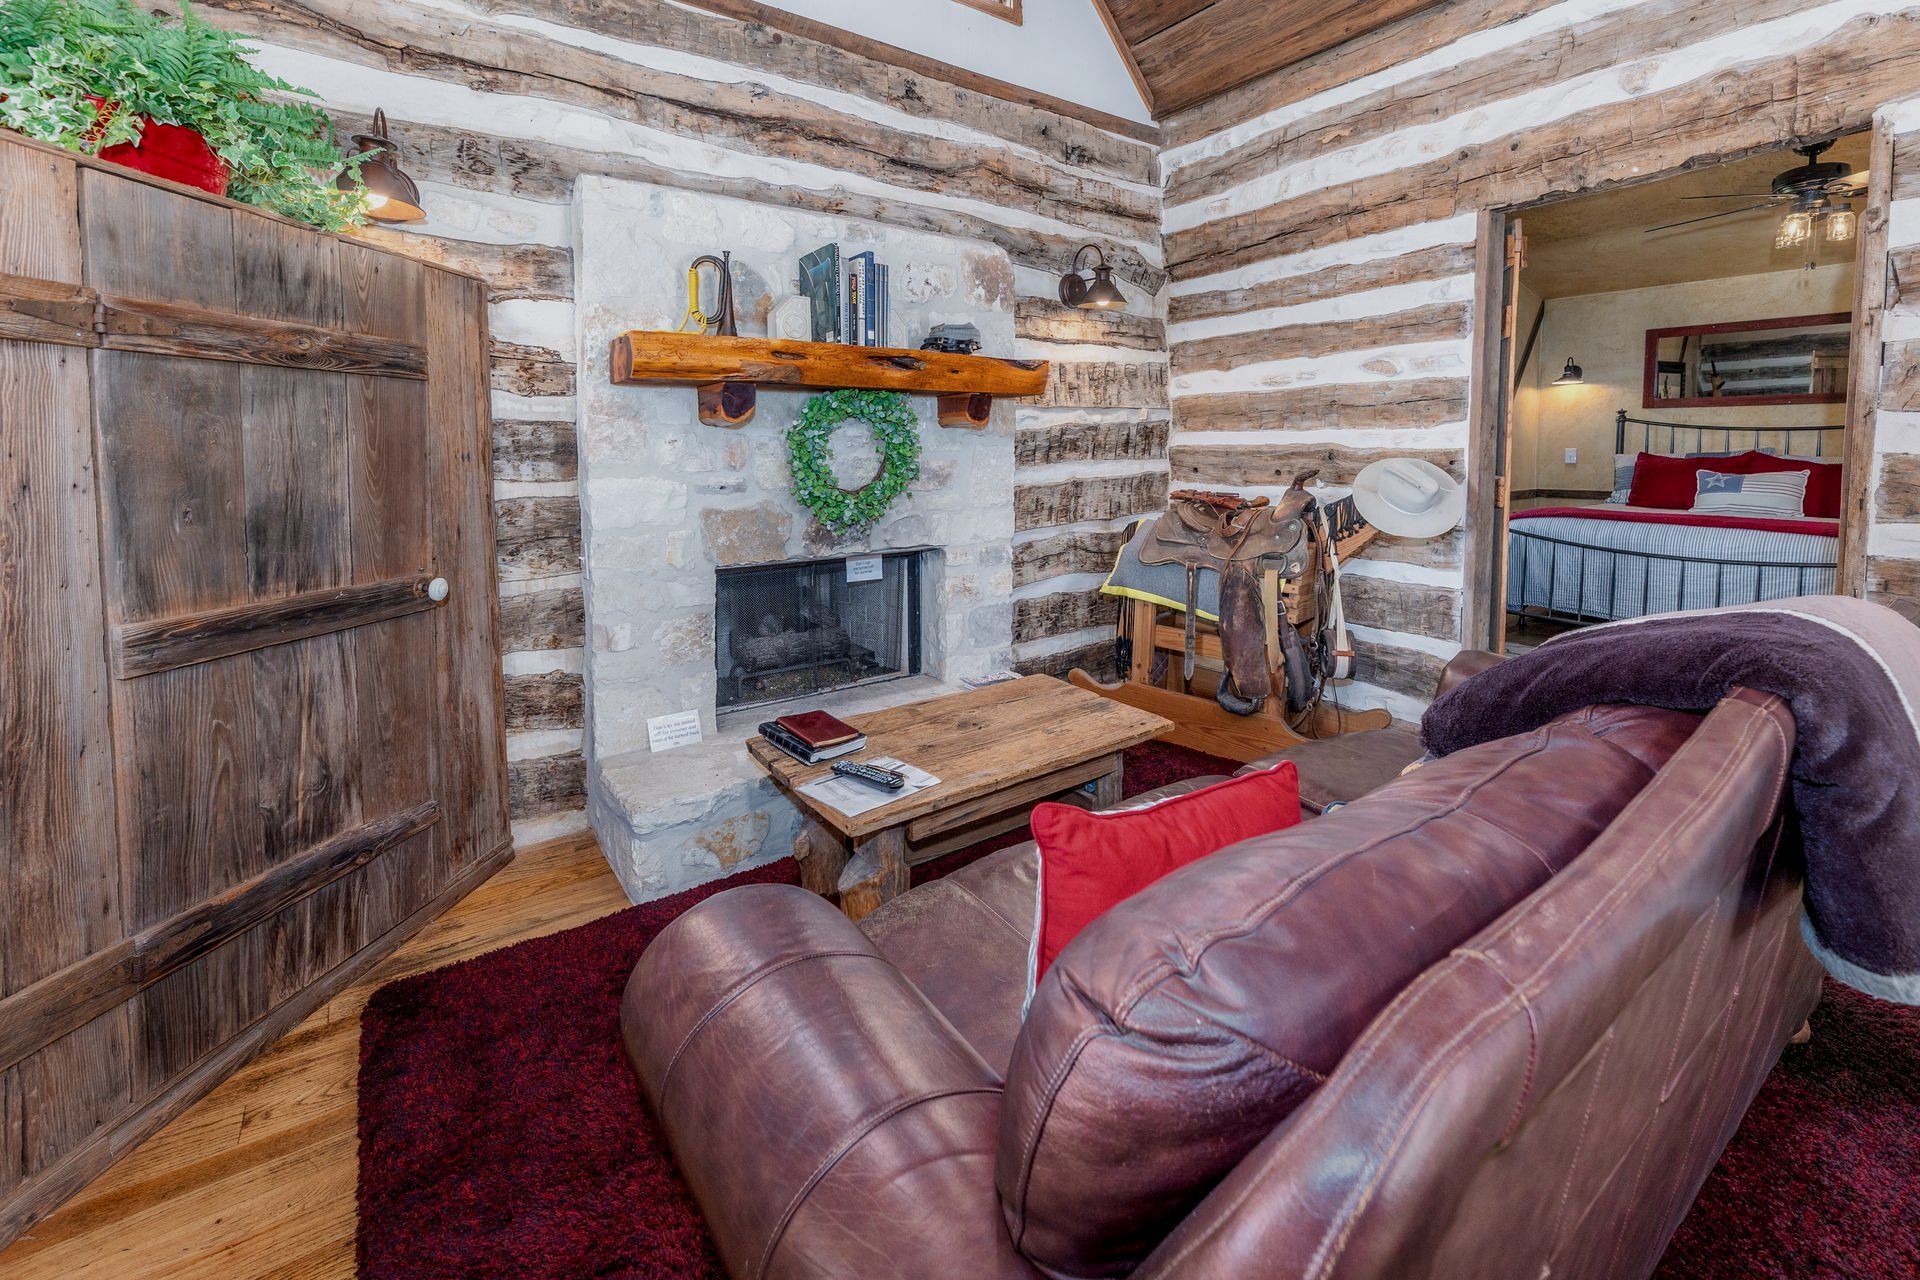 A living room in a log cabin with a couch and fireplace.